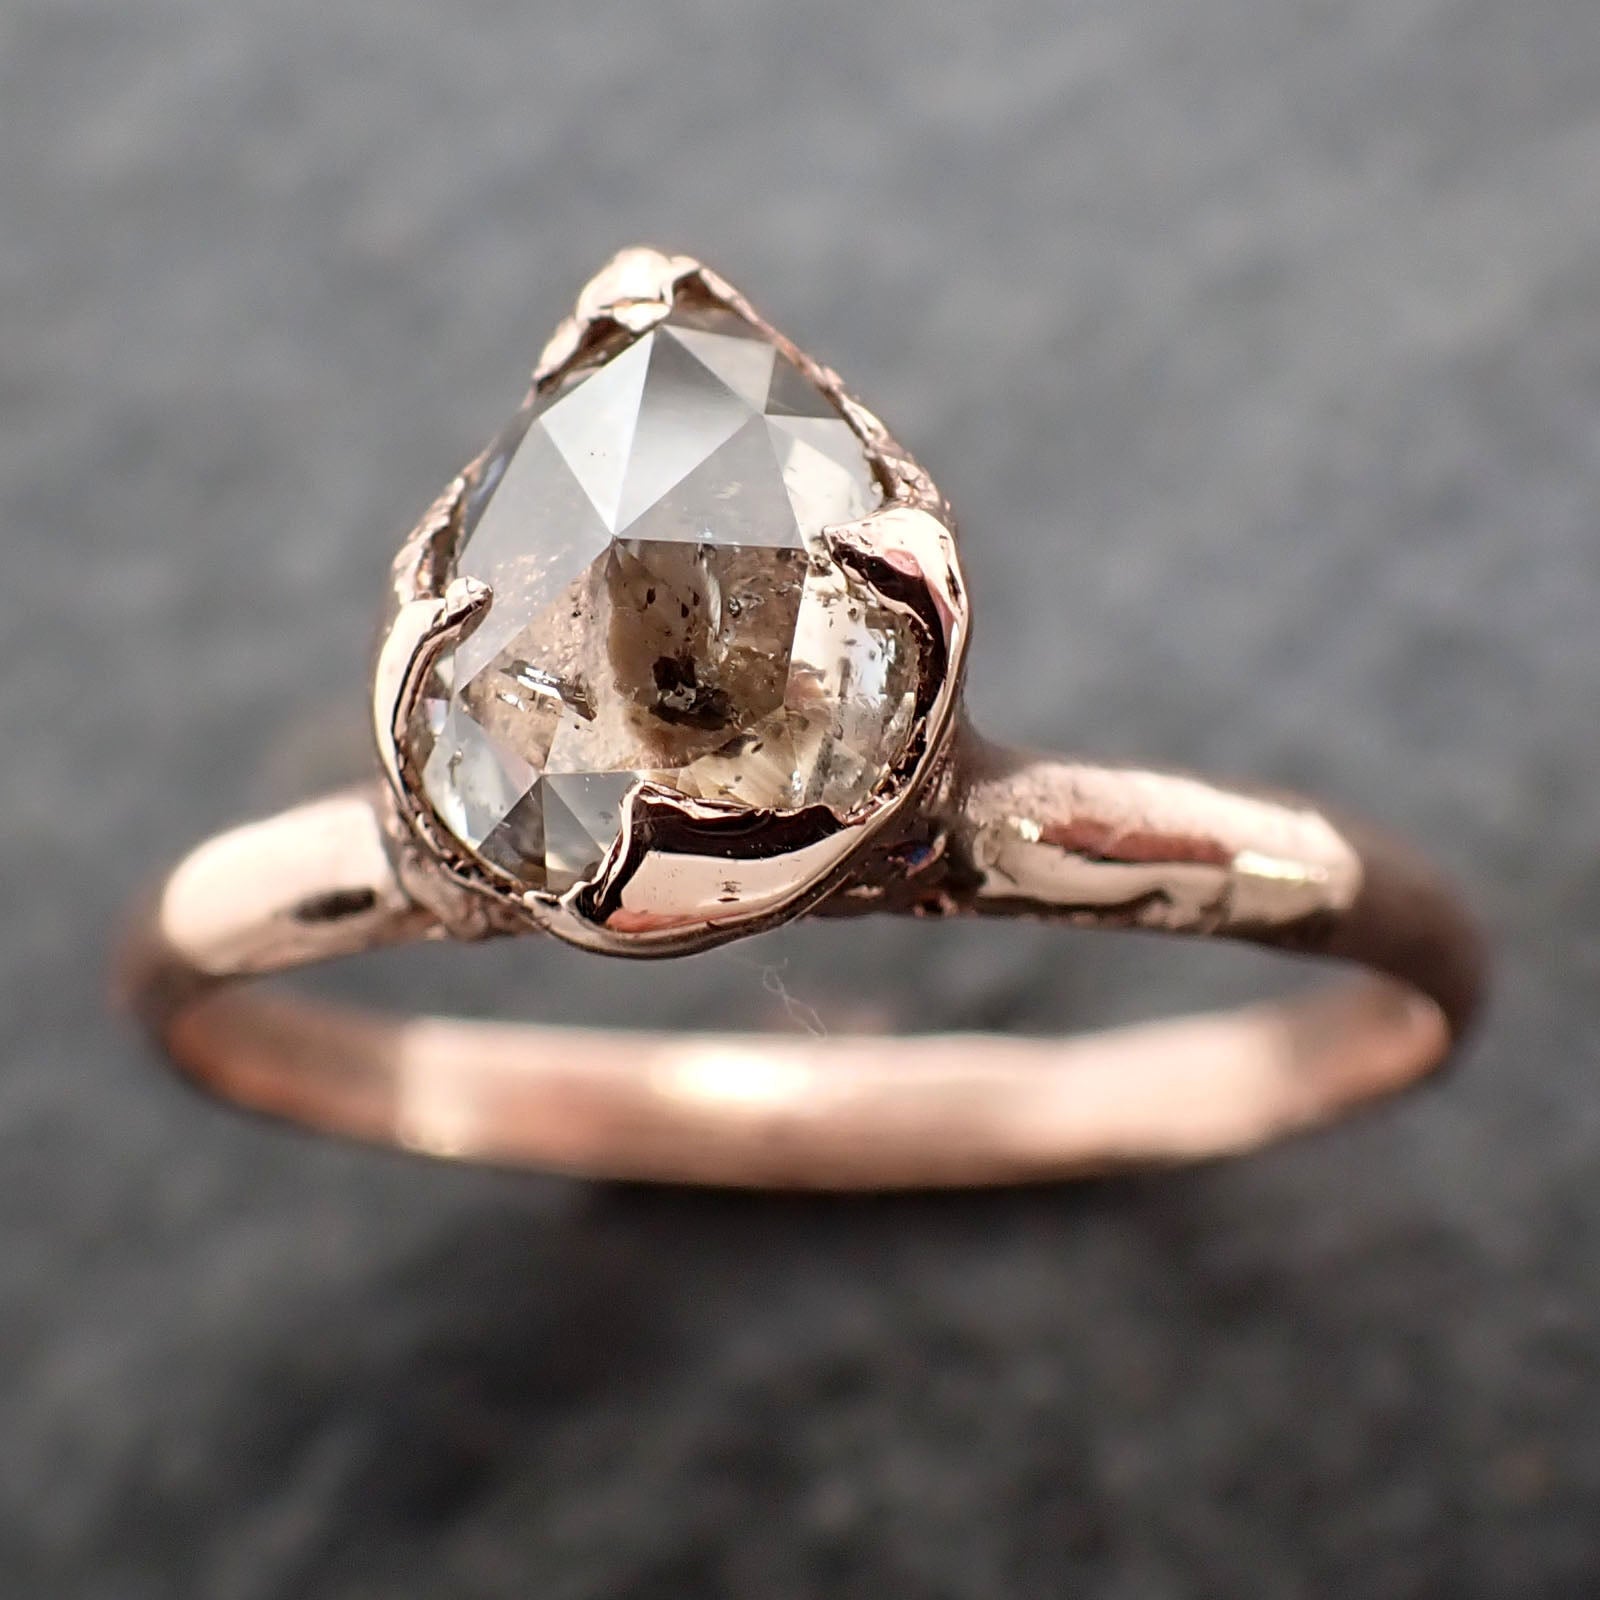 Faceted Fancy cut Salt and Pepper Diamond Solitaire Engagement 14k Rose Gold Wedding Ring byAngeline 2580